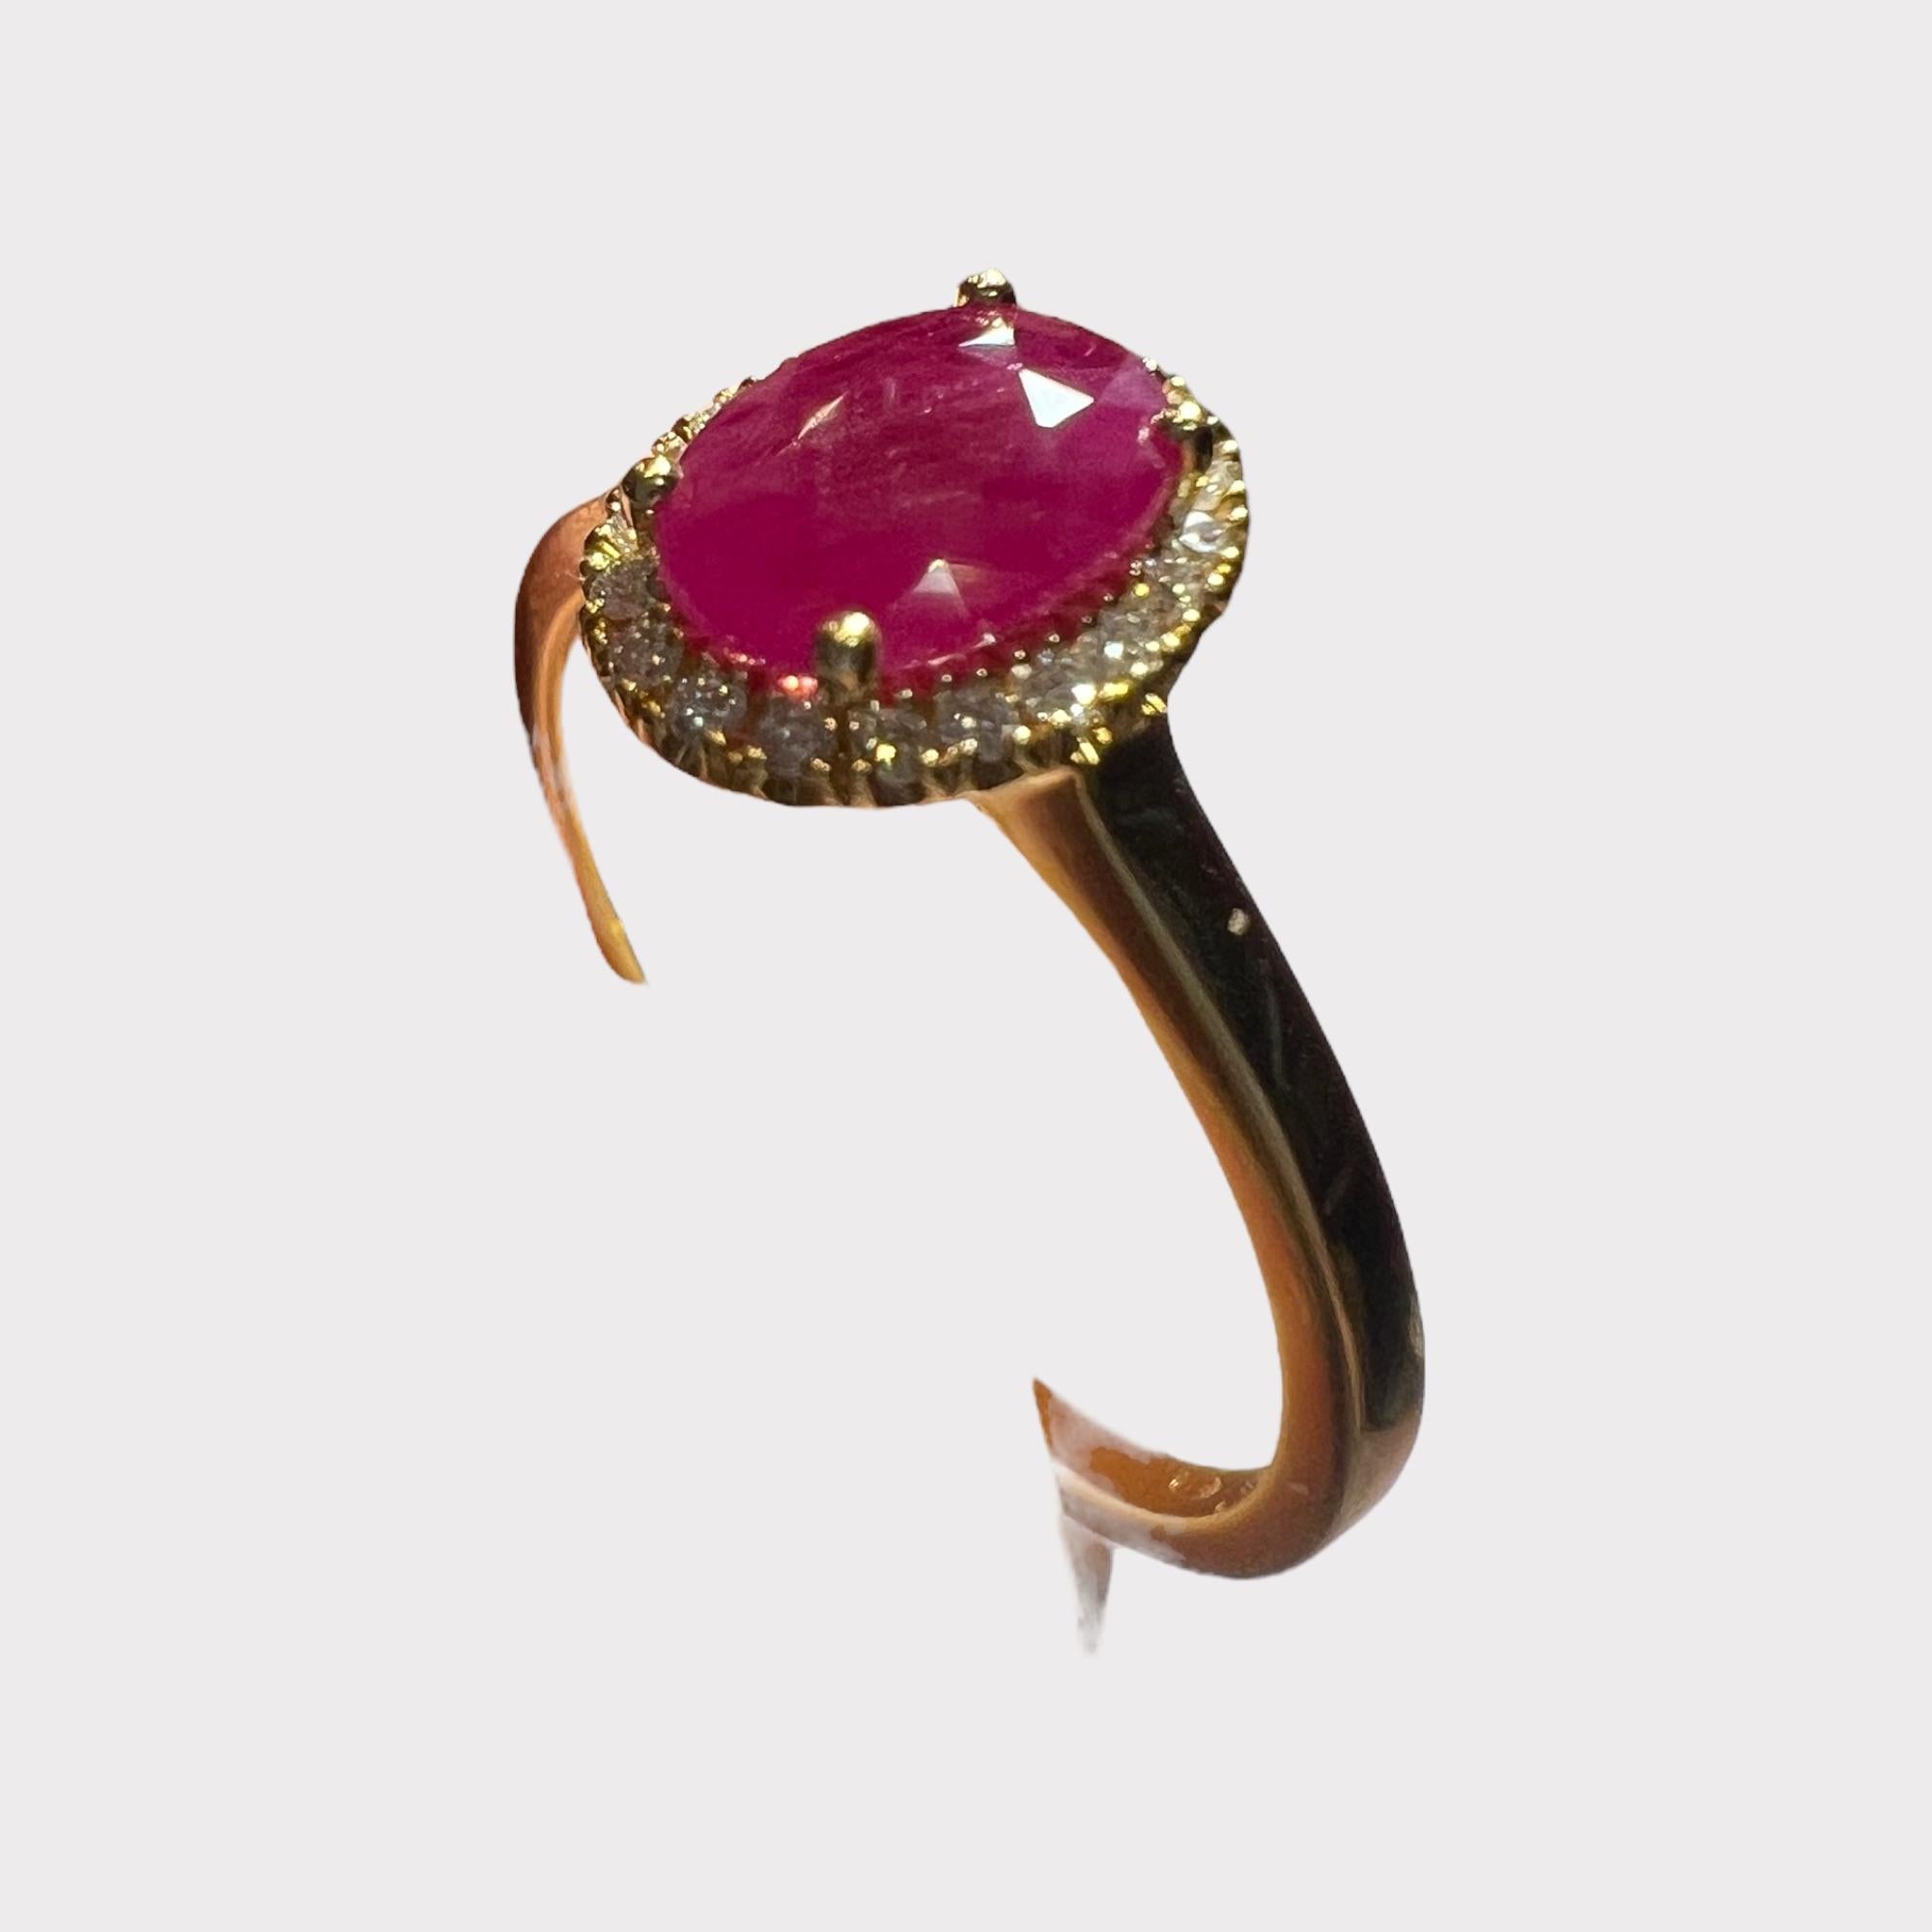 French Cut 18-Carat Gold Ring, Set with a Ruby in Its Center, Paved with Brilliants